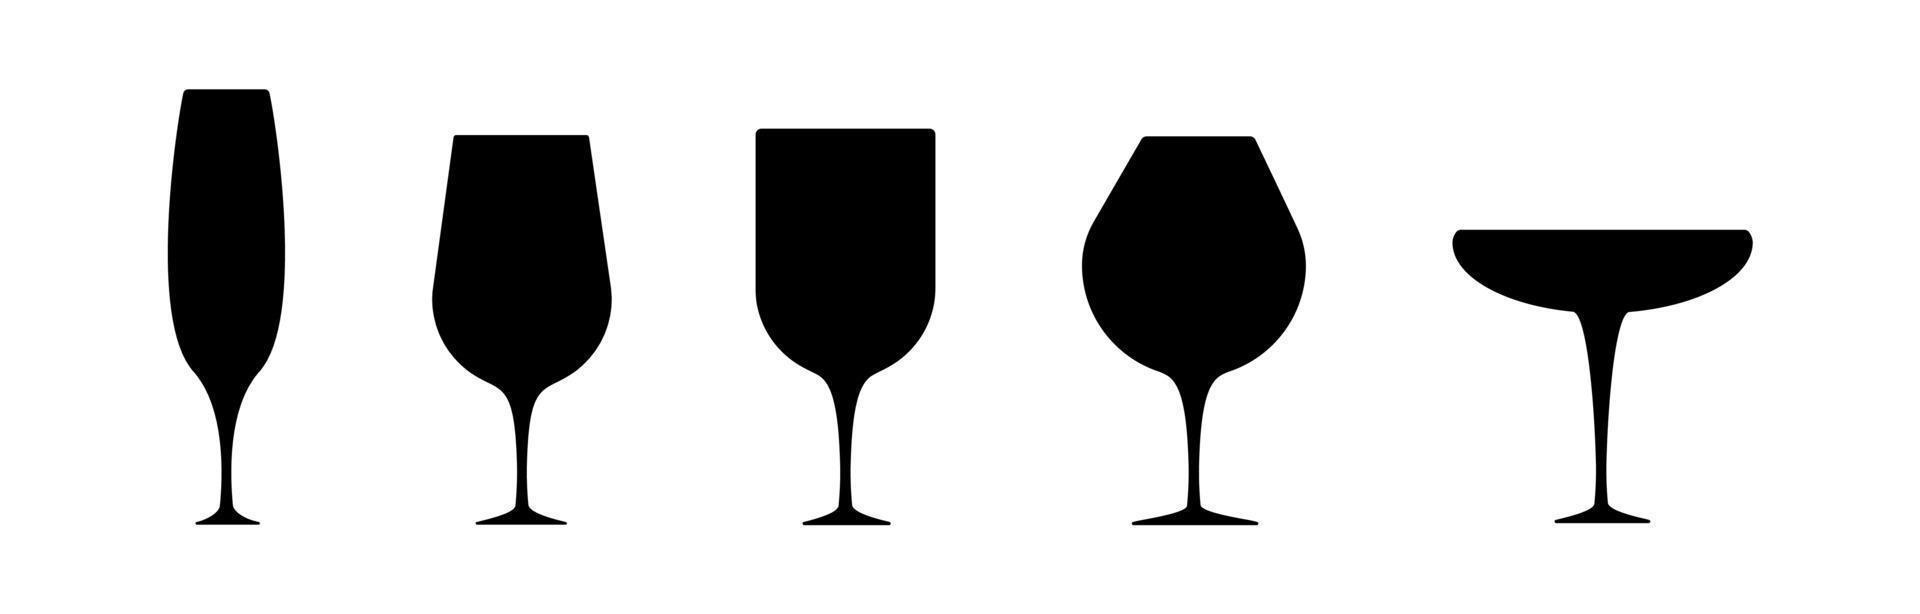 Wine and drink glasses silhouette set. Glass in black color isolated on white background. Silhouette wine glass icon set. Modern line art design. vector